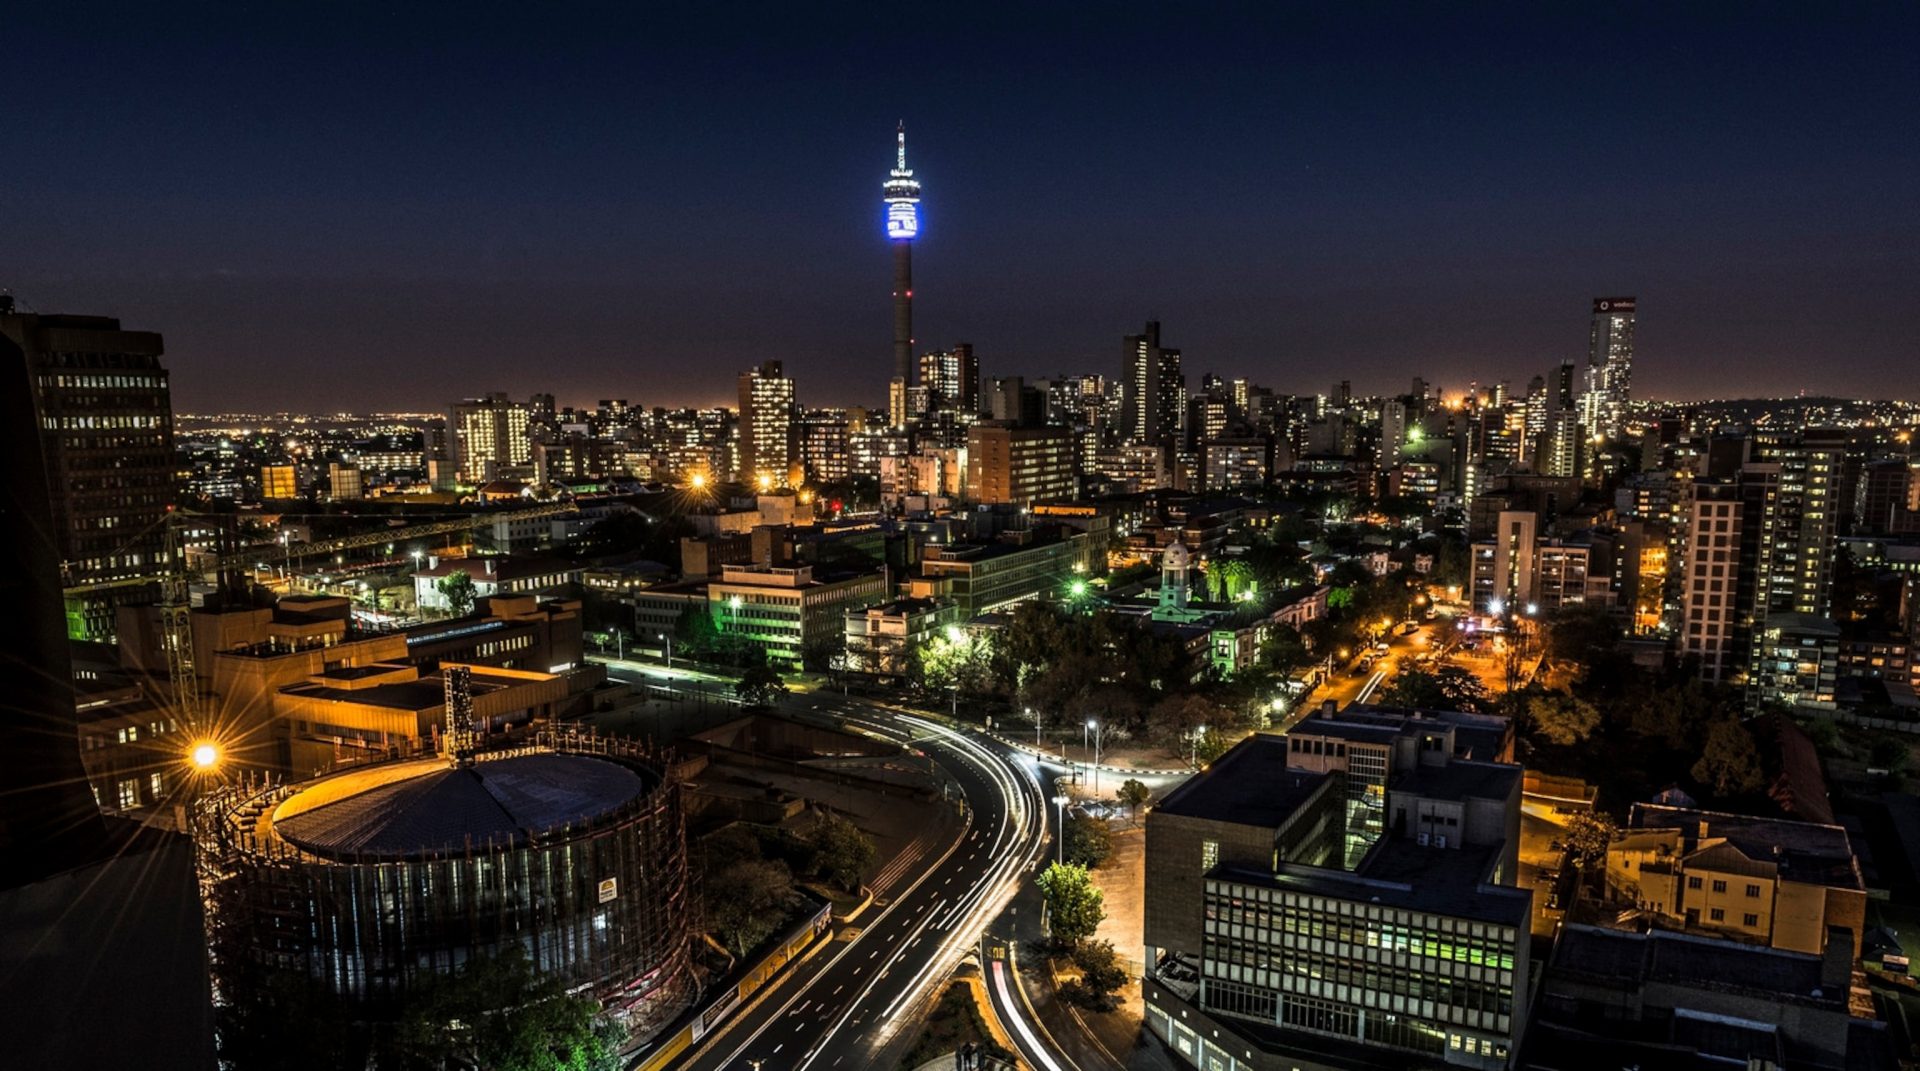 Night out in Johannesburg